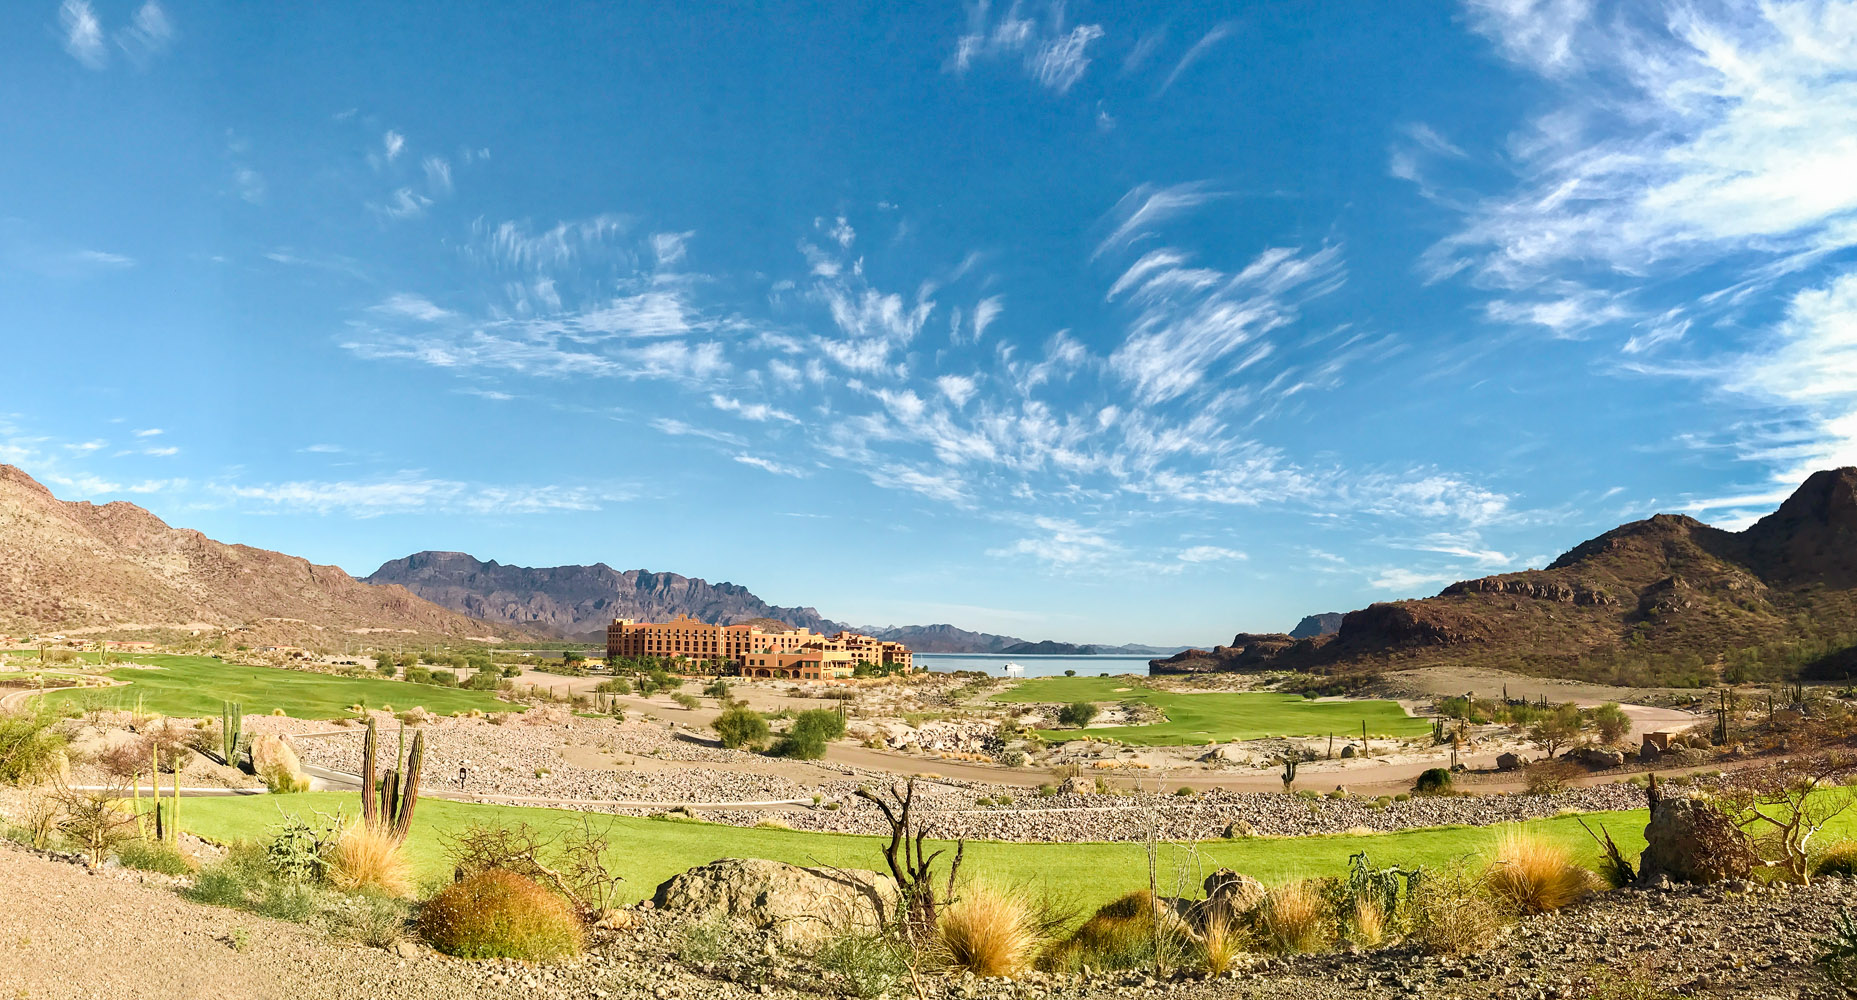 Golfing at the Villa del Palmar at the Islands of Loreto. Looking for the BEST vacation destination to treat yourself? From a quiet getaway to soak up the sun or to enjoy your honeymoon, the Villa del Palmar at the Islands of Loreto, Mexico is one of those hidden gems you need to visit for yourself. This unique, affordable vacation destination is packed with fun activities such as golfing, kayaking, paddle boarding, snorkeling, scuba diving, yoga, dancing, whale watching, and fishing. Whatever you’re looking for in your upcoming getaway, Villa del Palmar offers it!